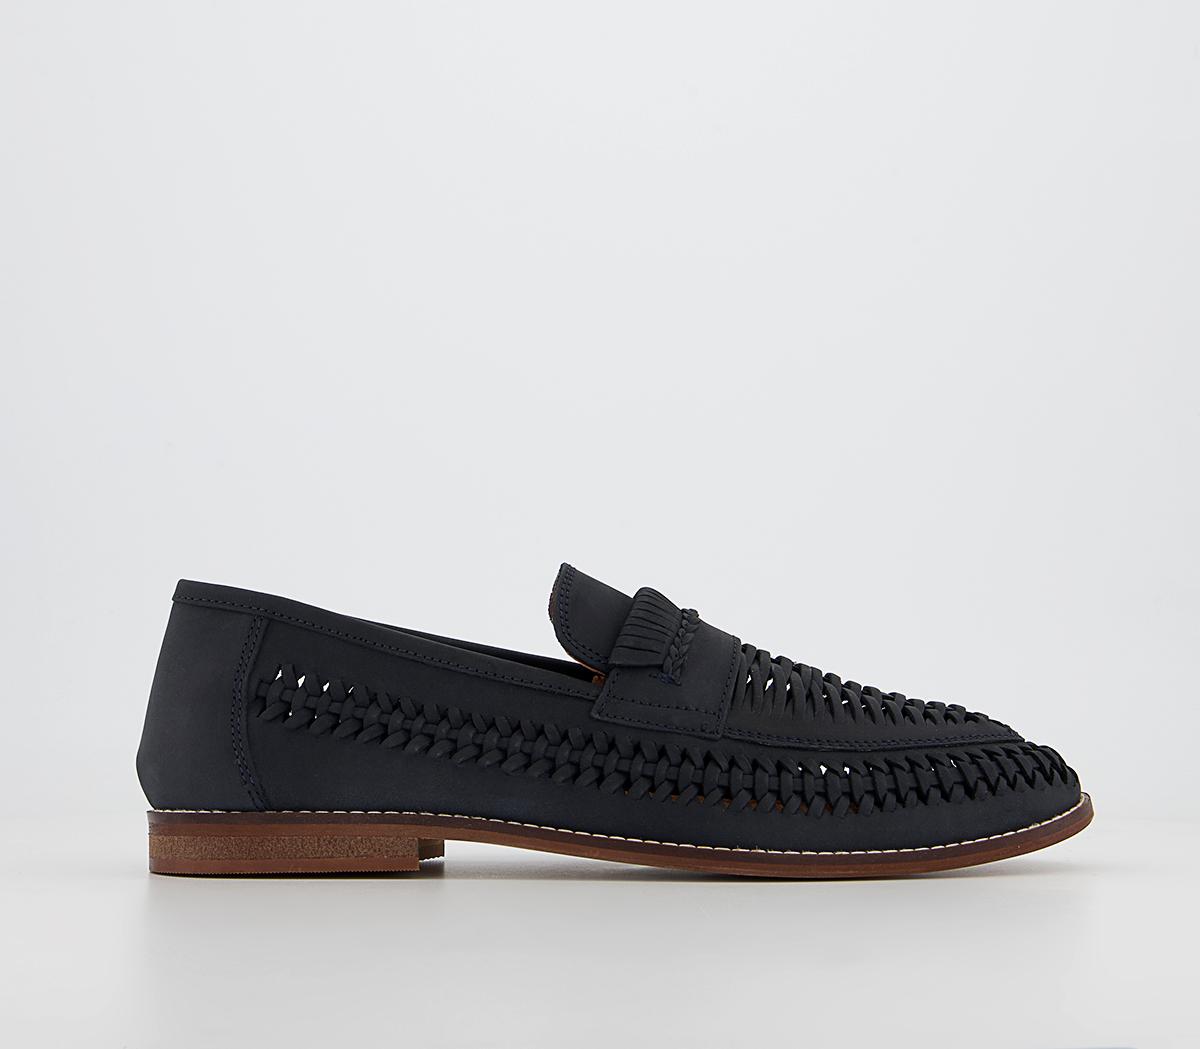 OFFICE Chiswick Woven Saddle Slip On Loafers Navy Nubuck - Men's Casual ...